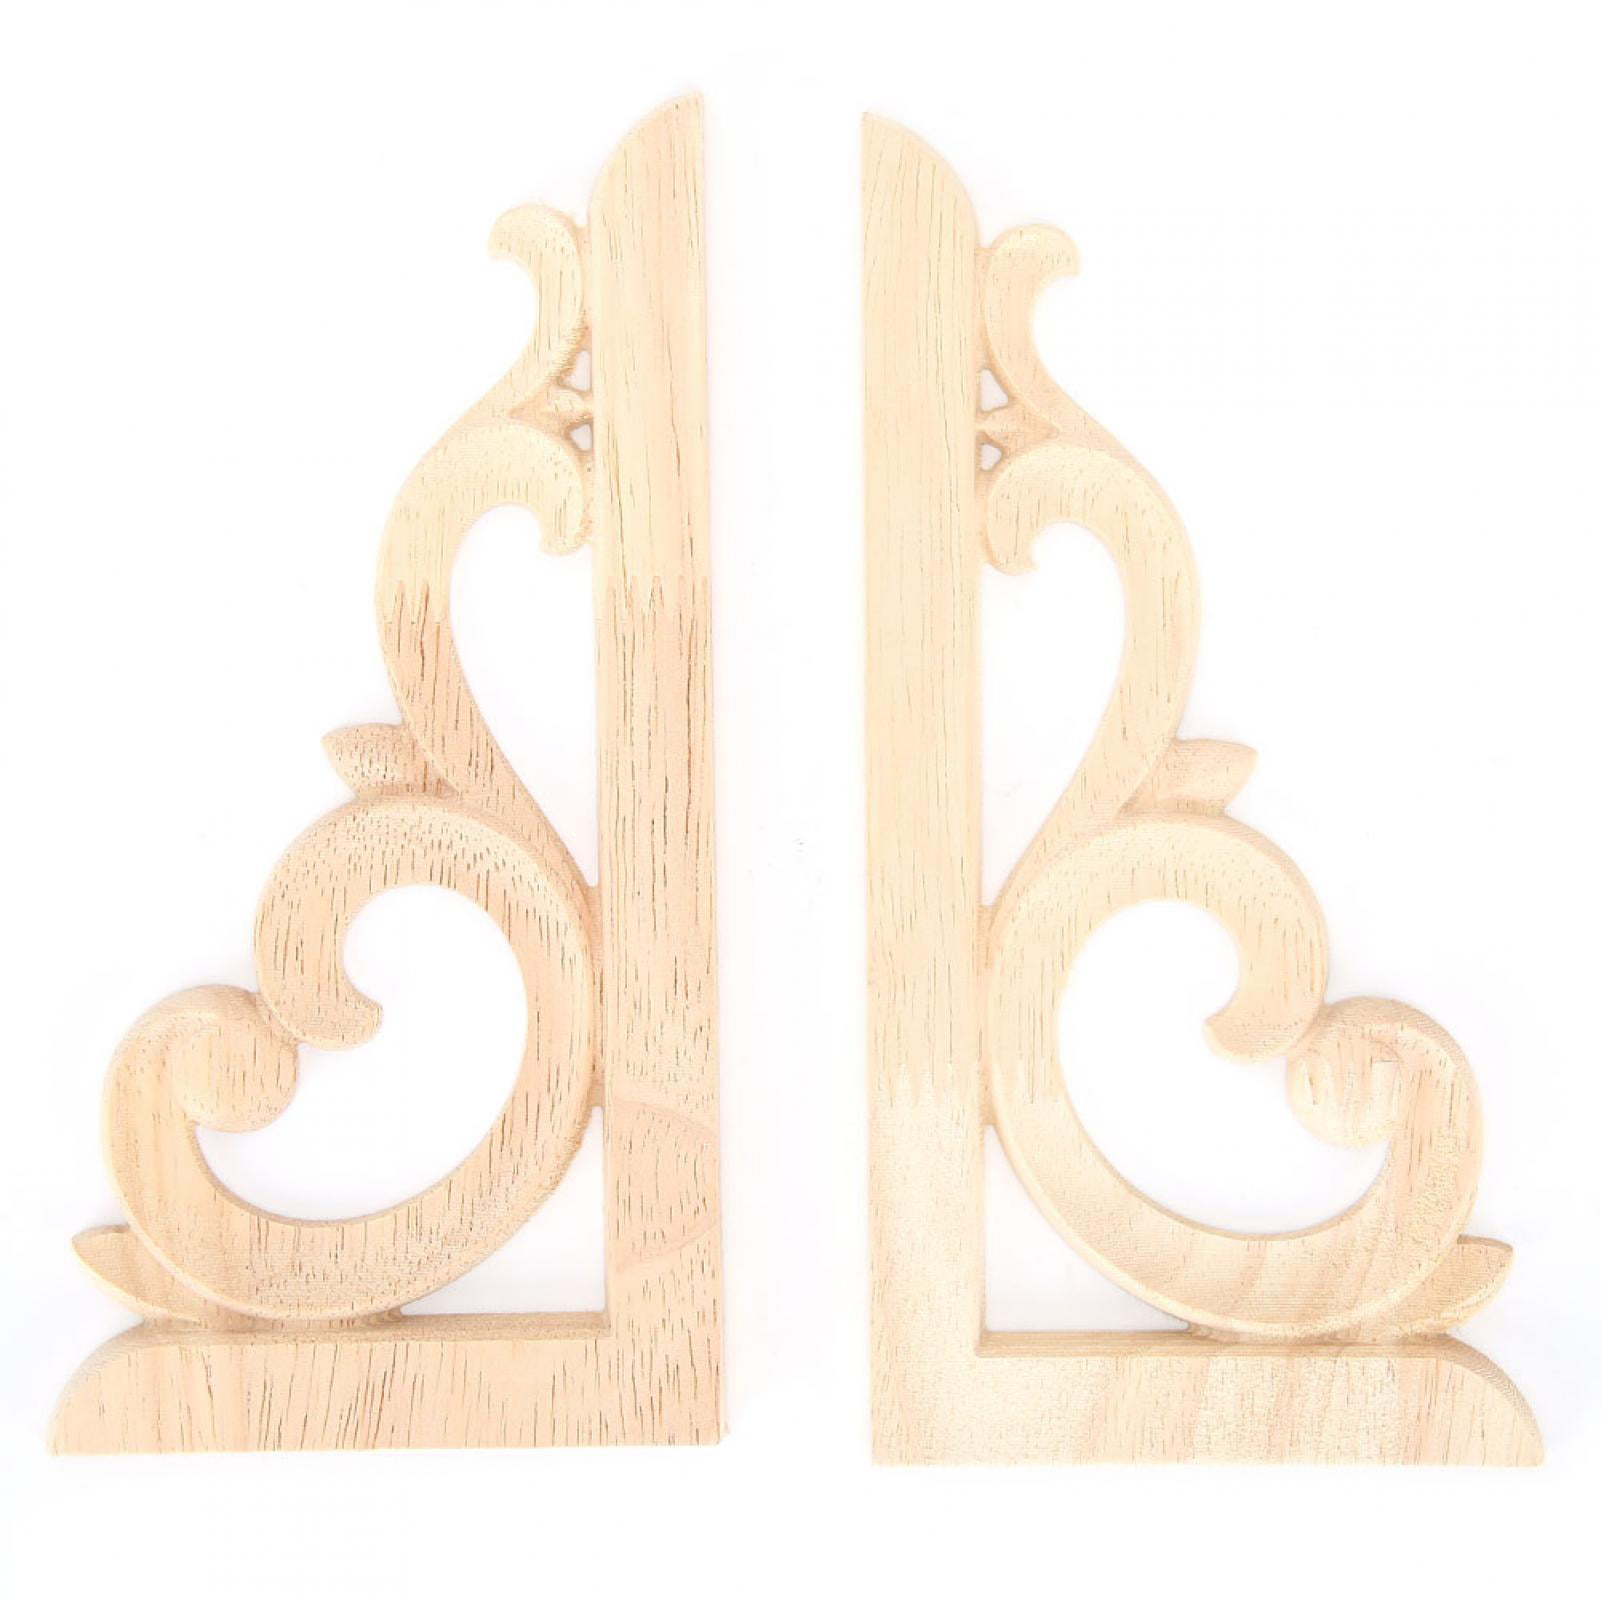 Wood Carved Corner Applique Unpainted Frame Decal For Bed Table Furniture Decor